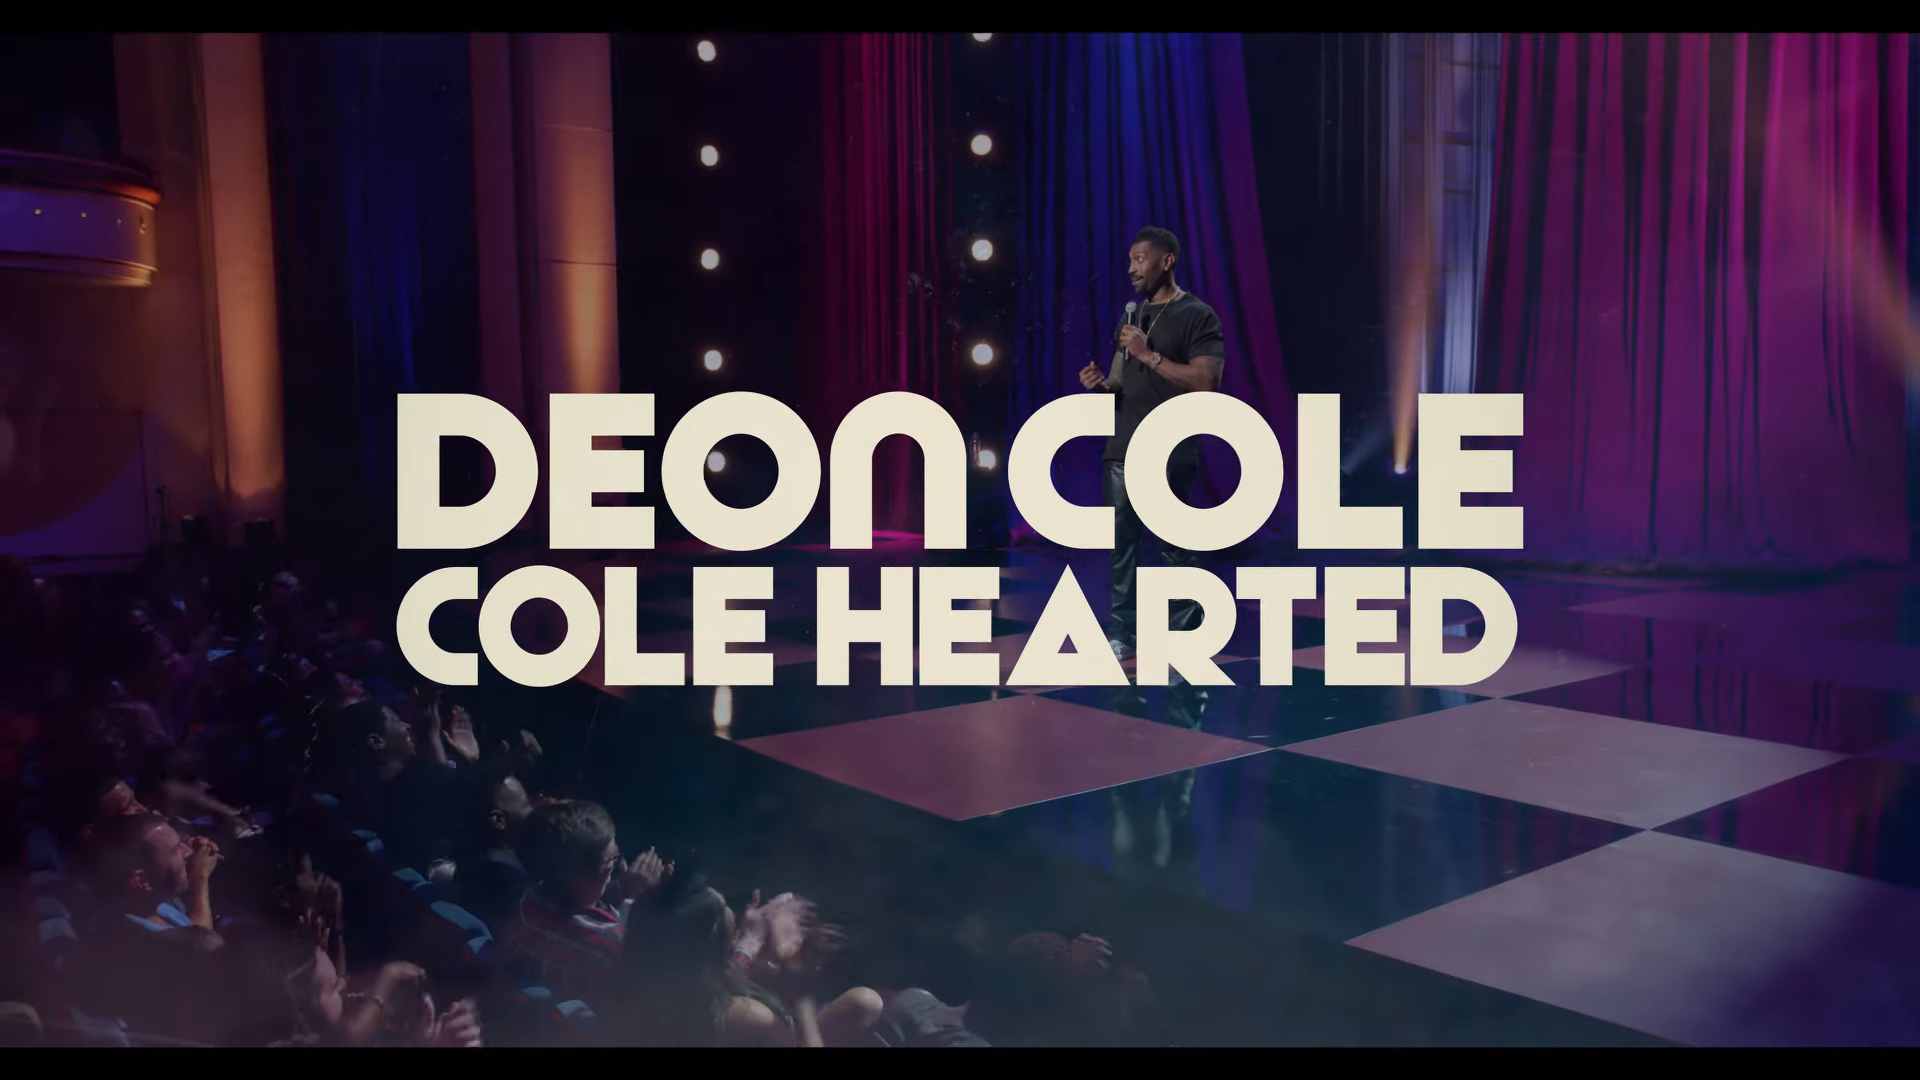 Deon Cole Netflix Trailer, Dean Cole Cole Hearted Netflix Trailer, Best Netflix Comedy Specials, Coming to Netflix in October 2019